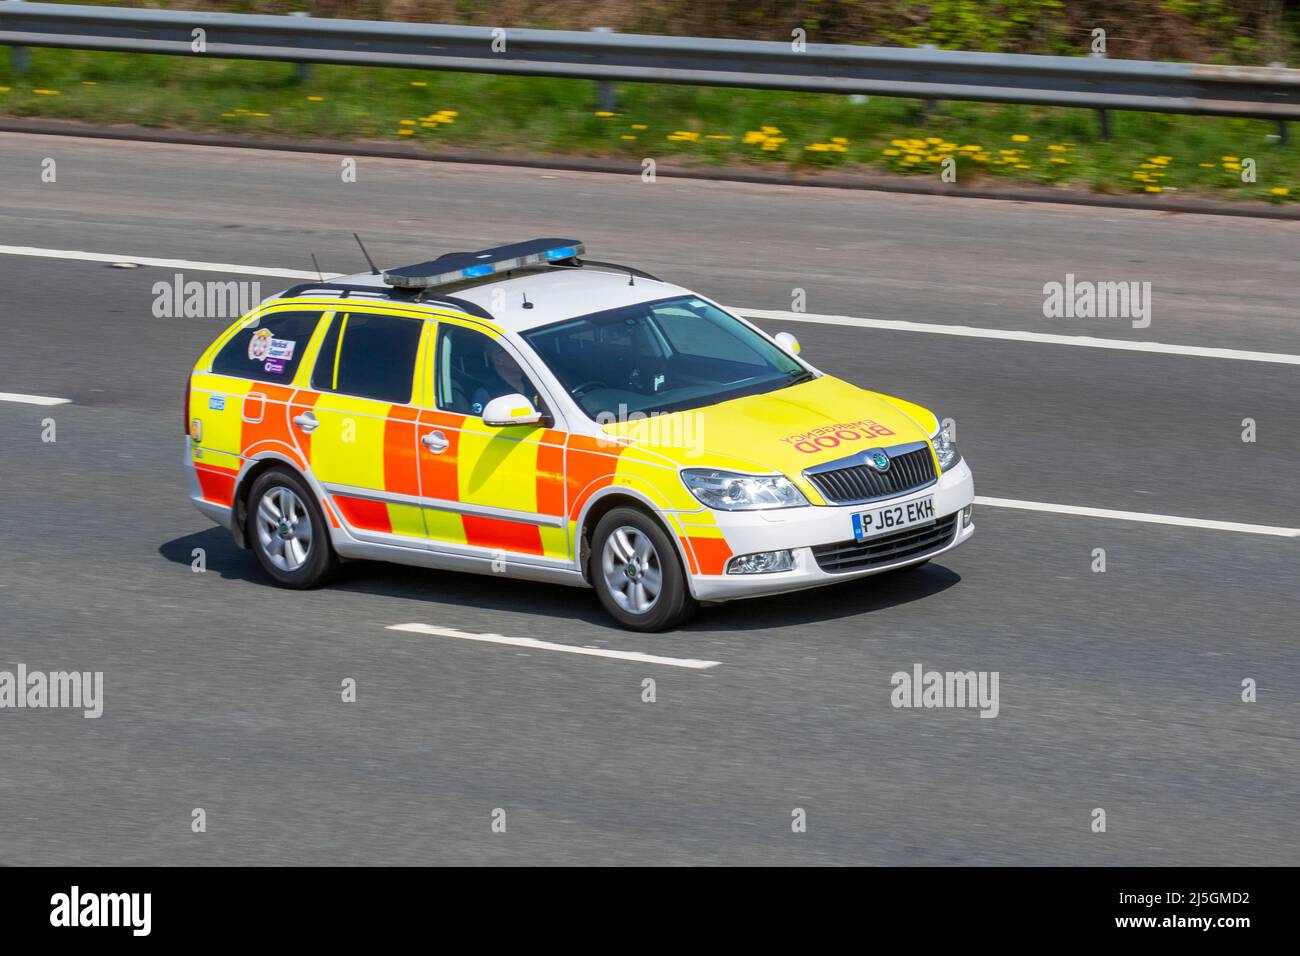 Blood Emergency, Medical supplies transported in 2012 Skoda Octavia 1968cc diesel emergency vehicle driving on the M61 motorway in Manchester, UK Stock Photo